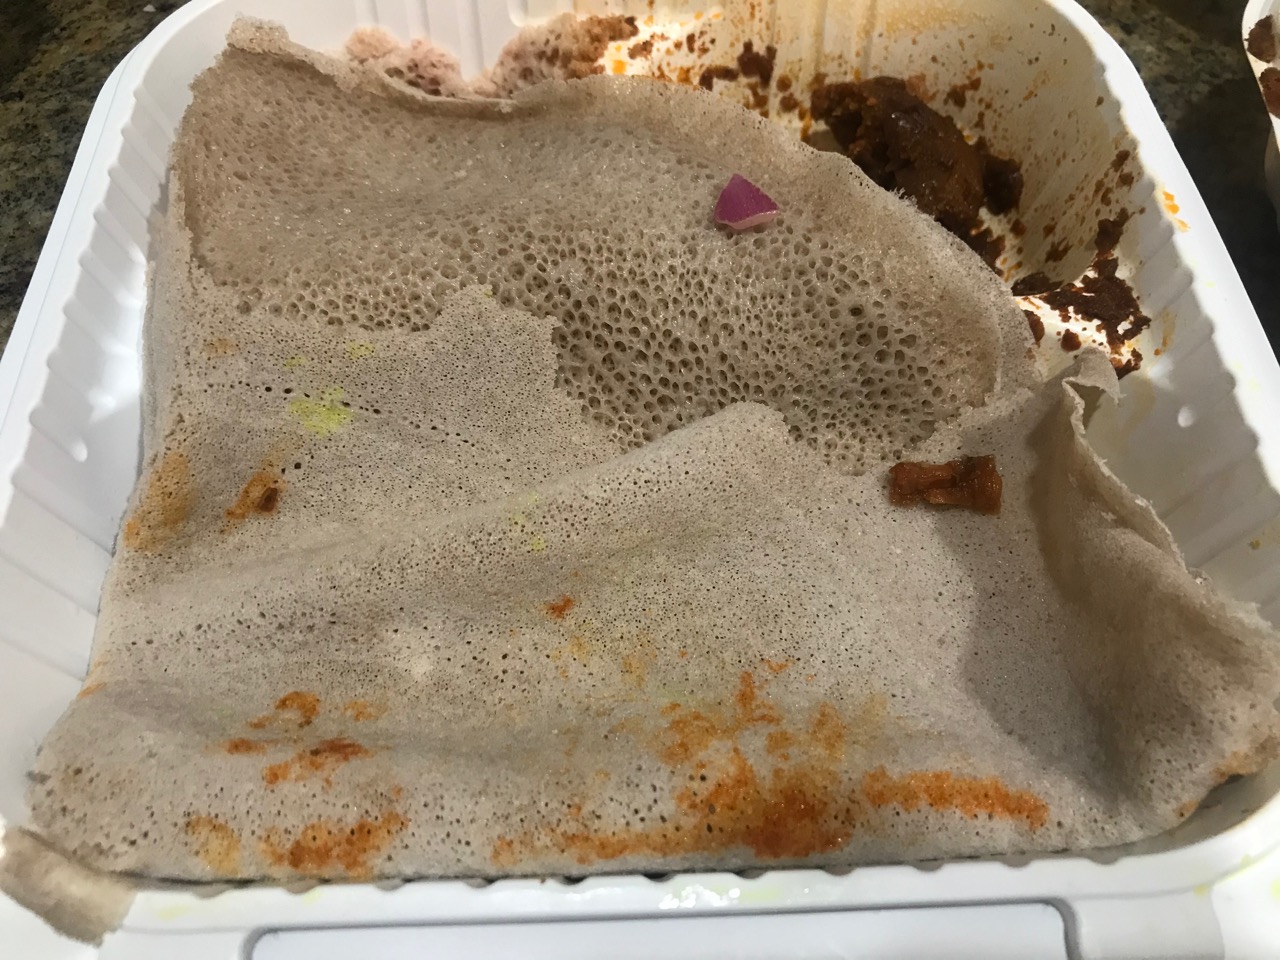 injera in the takeout container